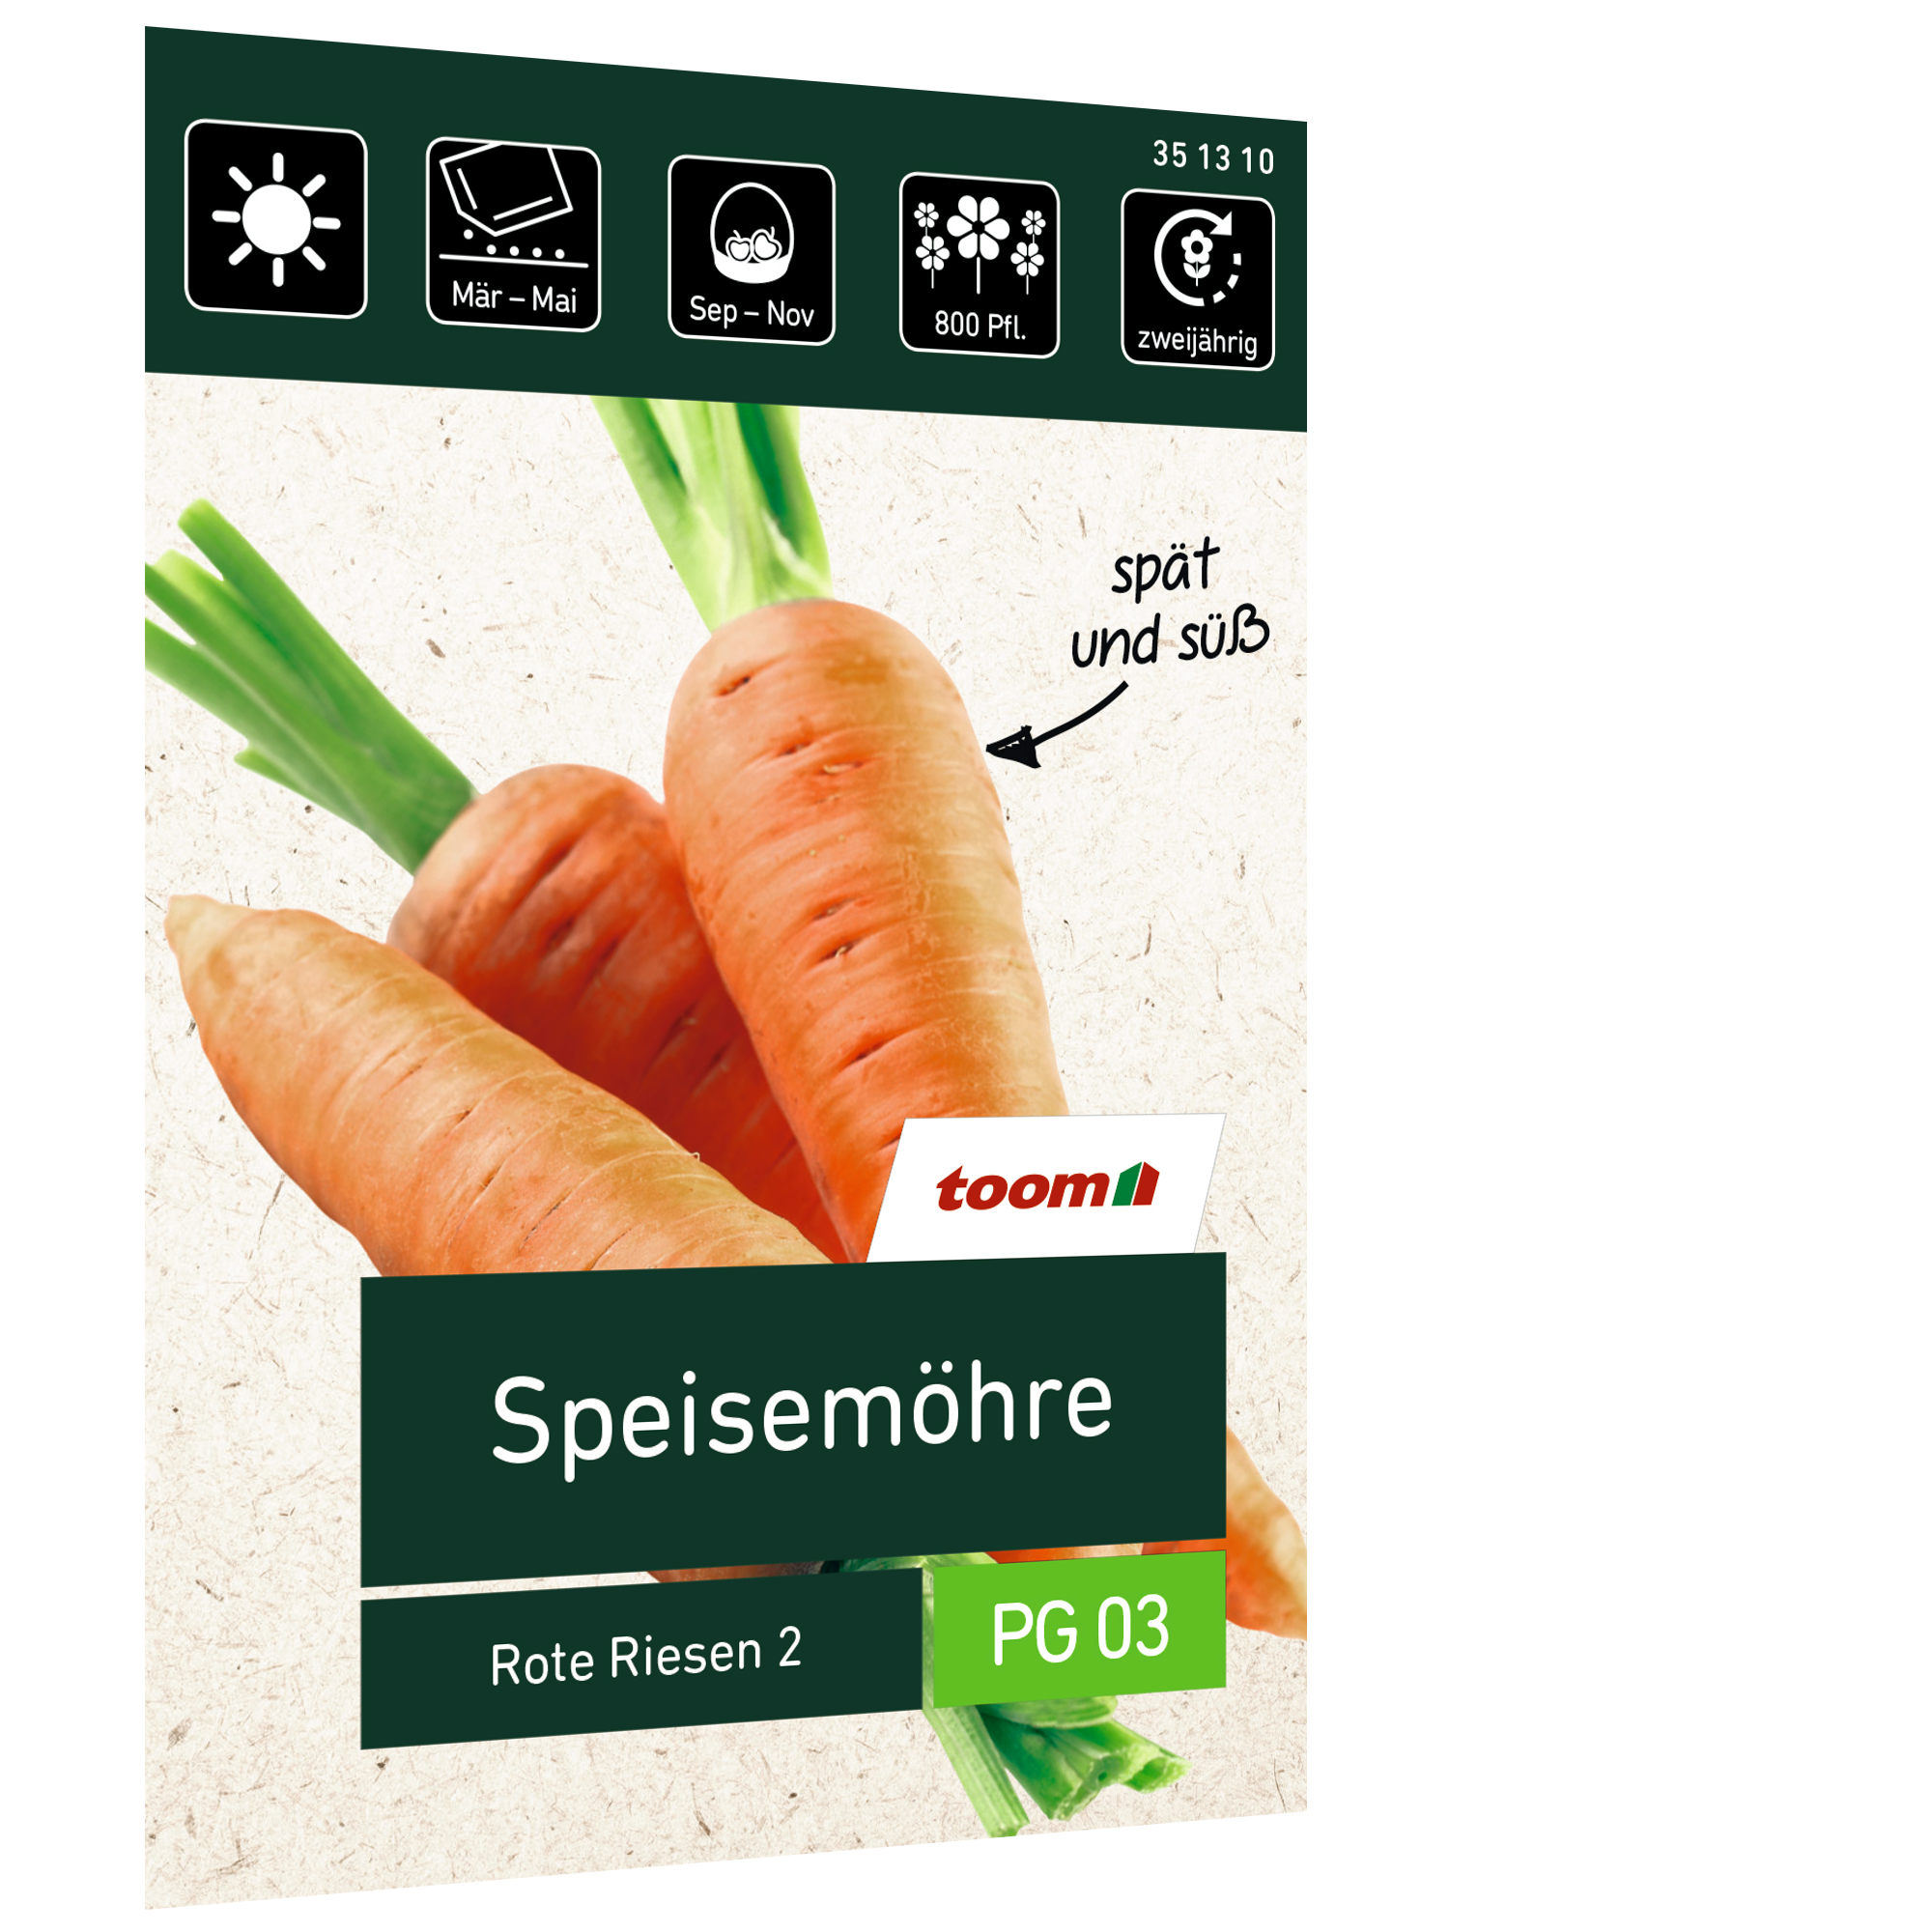 Speisemöhre 'Rote Riesen 2' + product picture